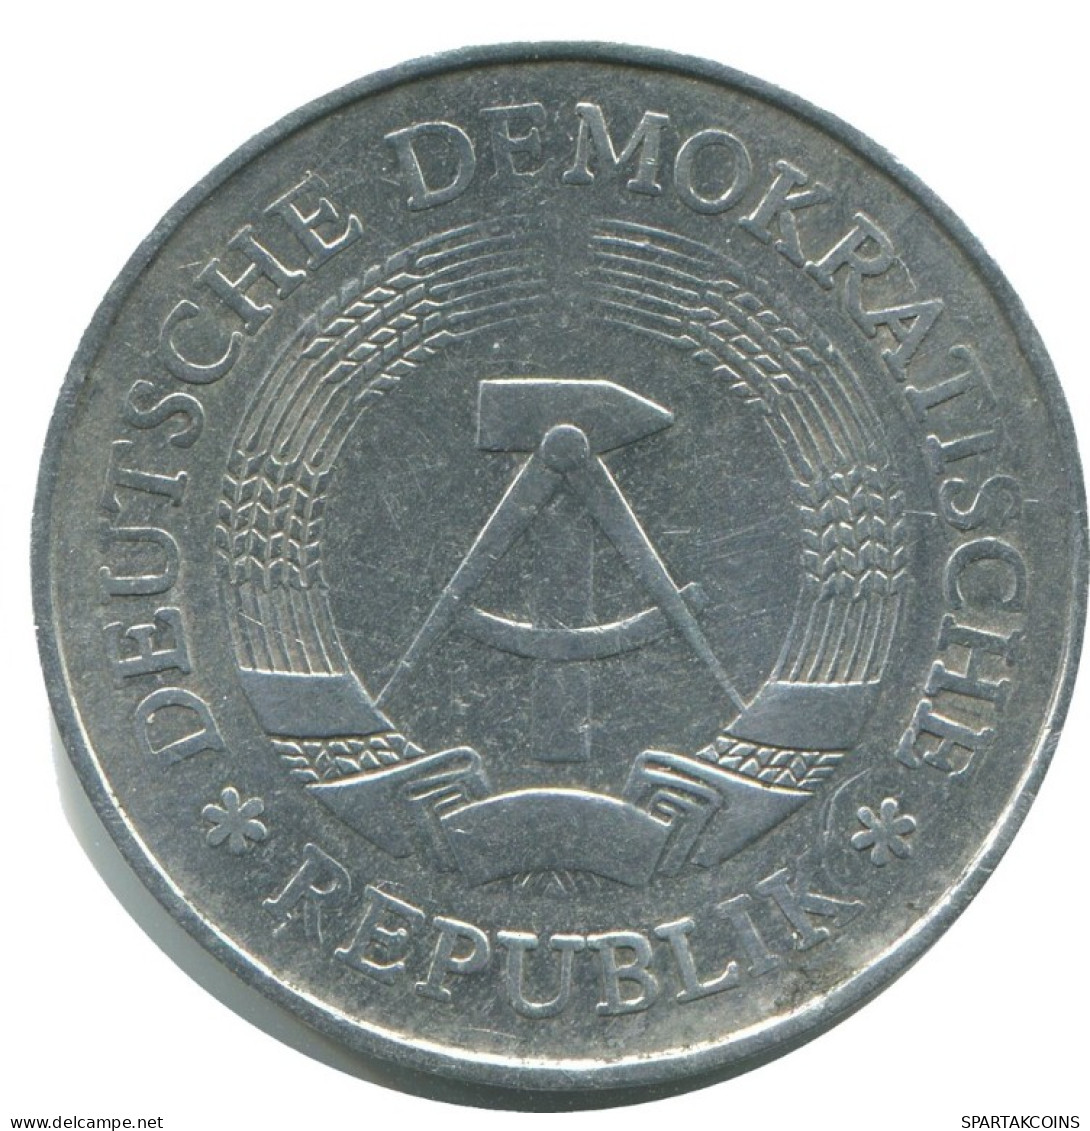 1 MARK 1977 A DDR EAST DEUTSCHLAND Münze GERMANY #AE136.D.A - 1 Marco